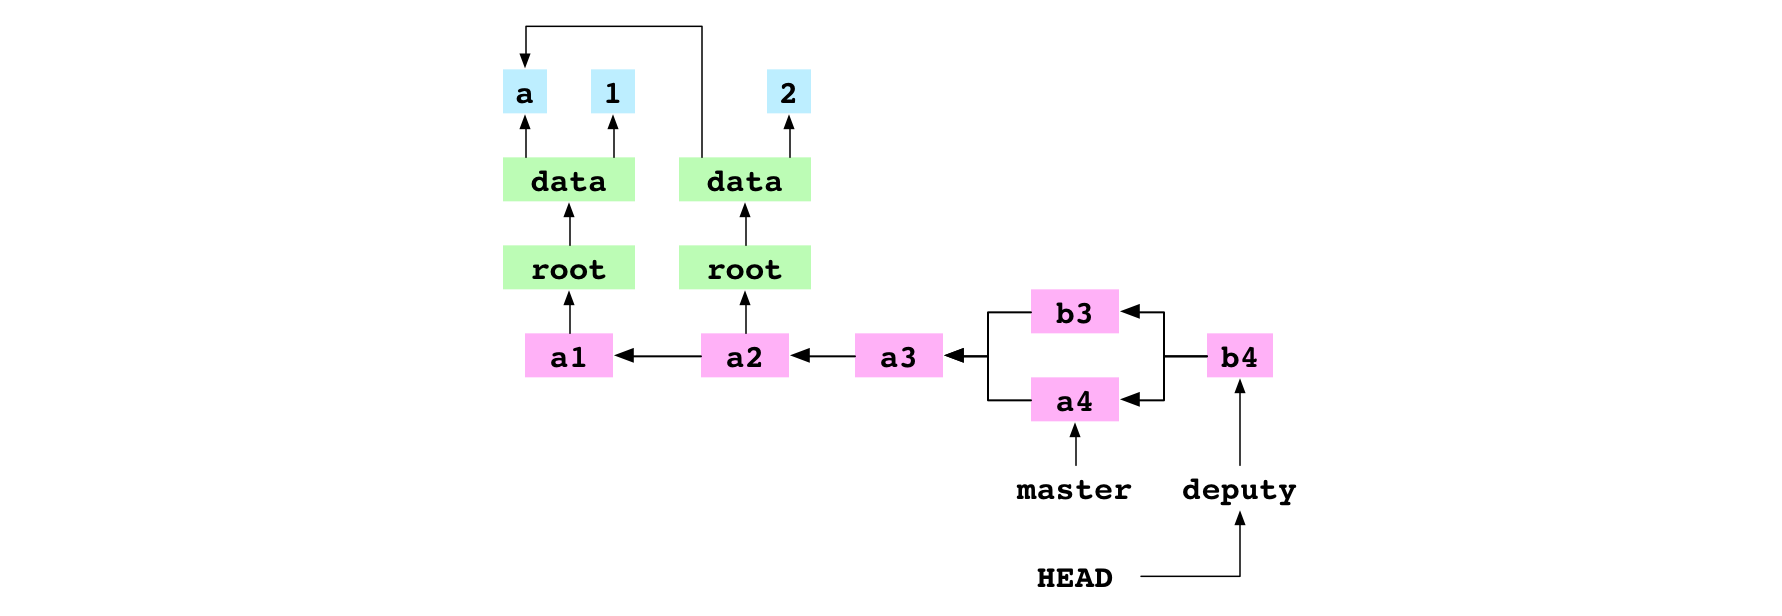 b4, the merge commit resulting from the recursive merge of a4 into b3